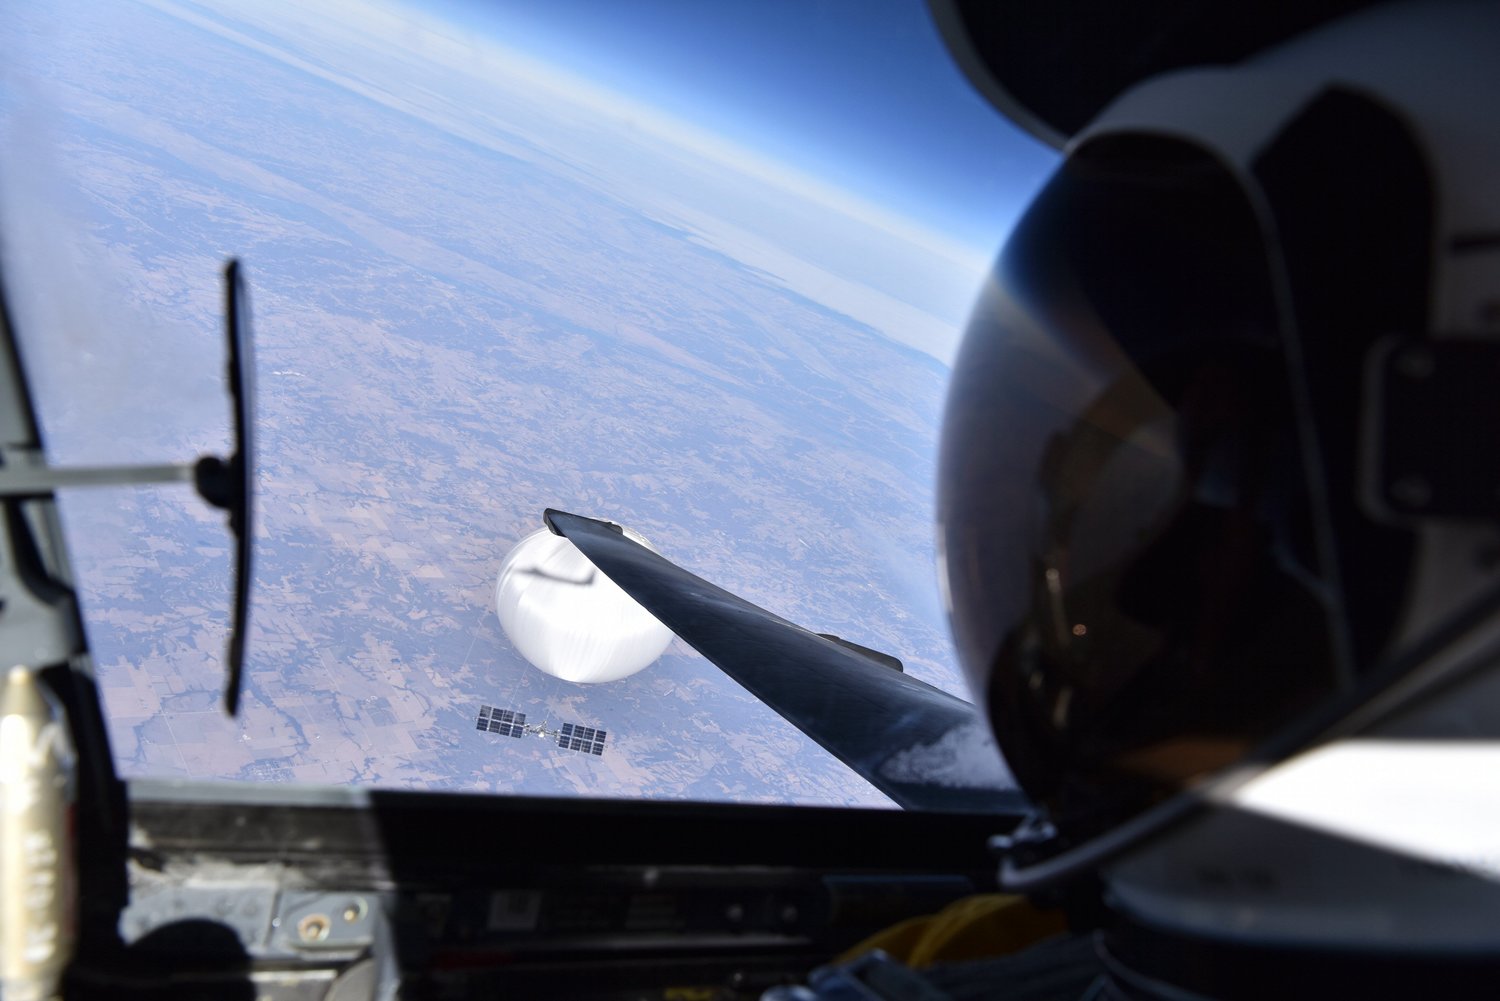 The pilot of a U-2 spy plane took a selfie photo while observing a Chinese spy balloon as it was traveling over Montgomery County in early February. A tiny town, barely visible in the full-size image, has been identified by an NPR reporter as Bellflower.